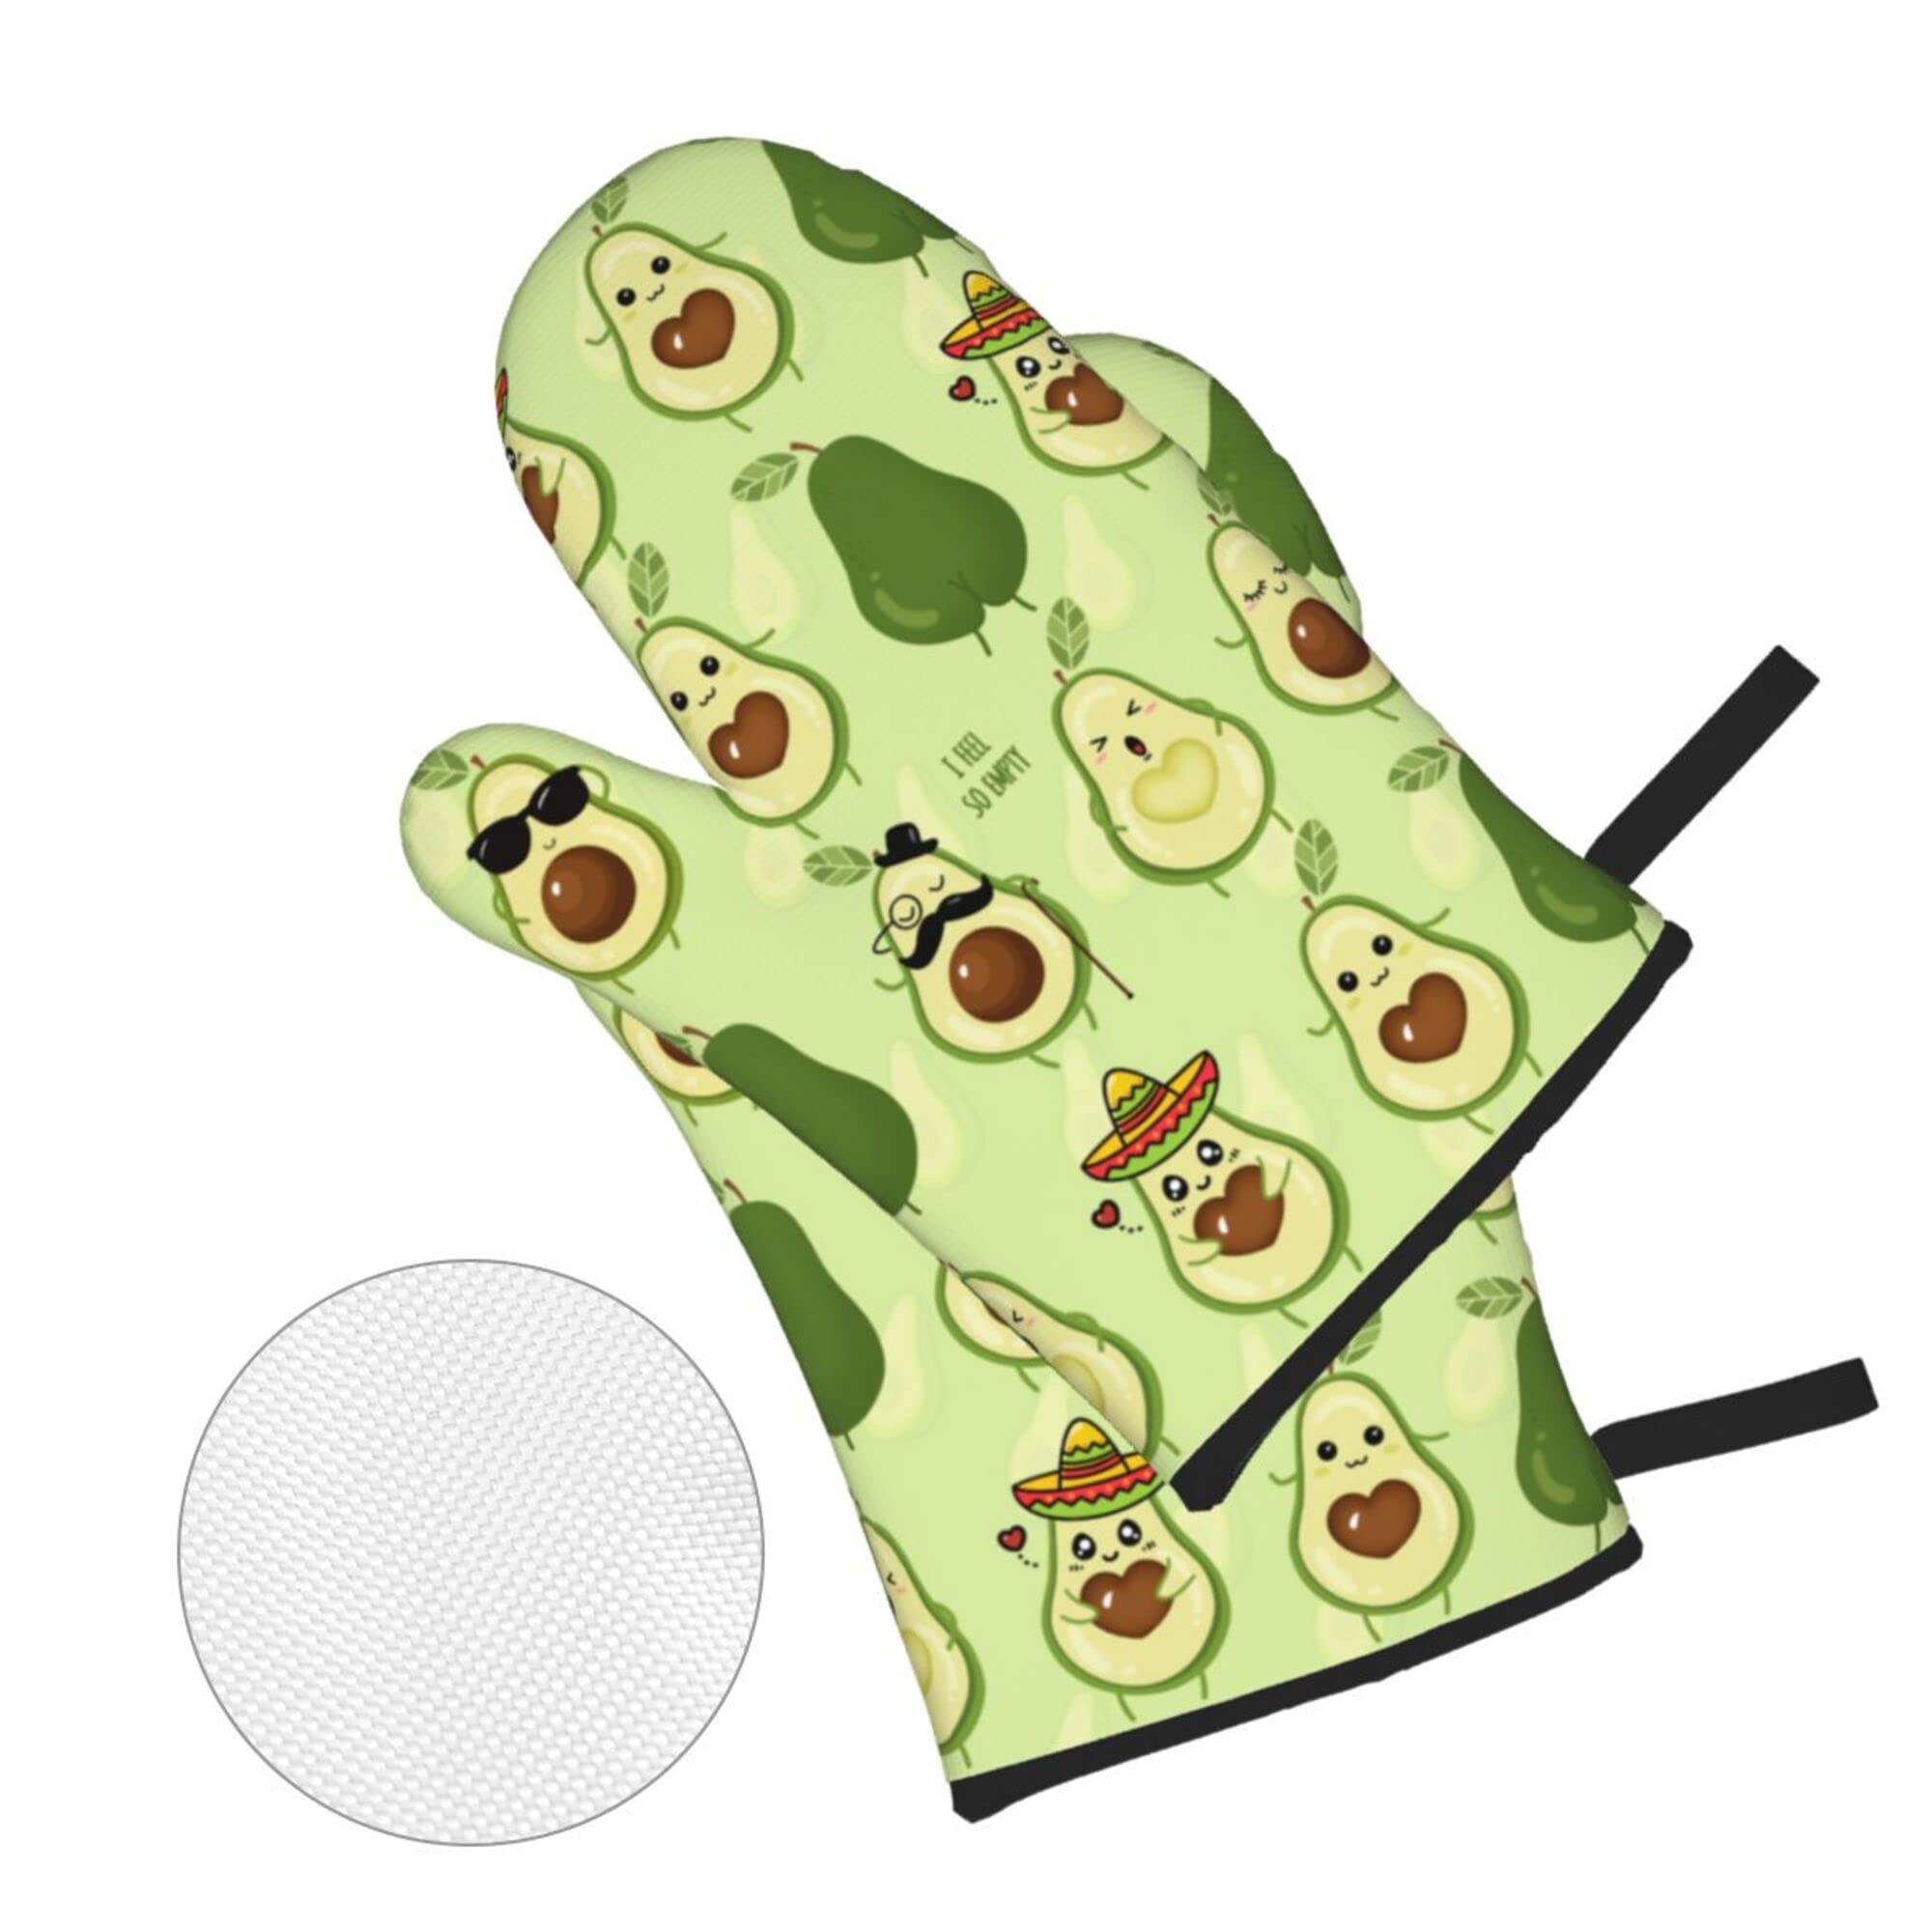 HISORO Cute Avocados Oven Mitts and Pot Holders Sets for Gift Set Kitchen Heat Resistant Waterproof Durable for BBQ Cooking Baking